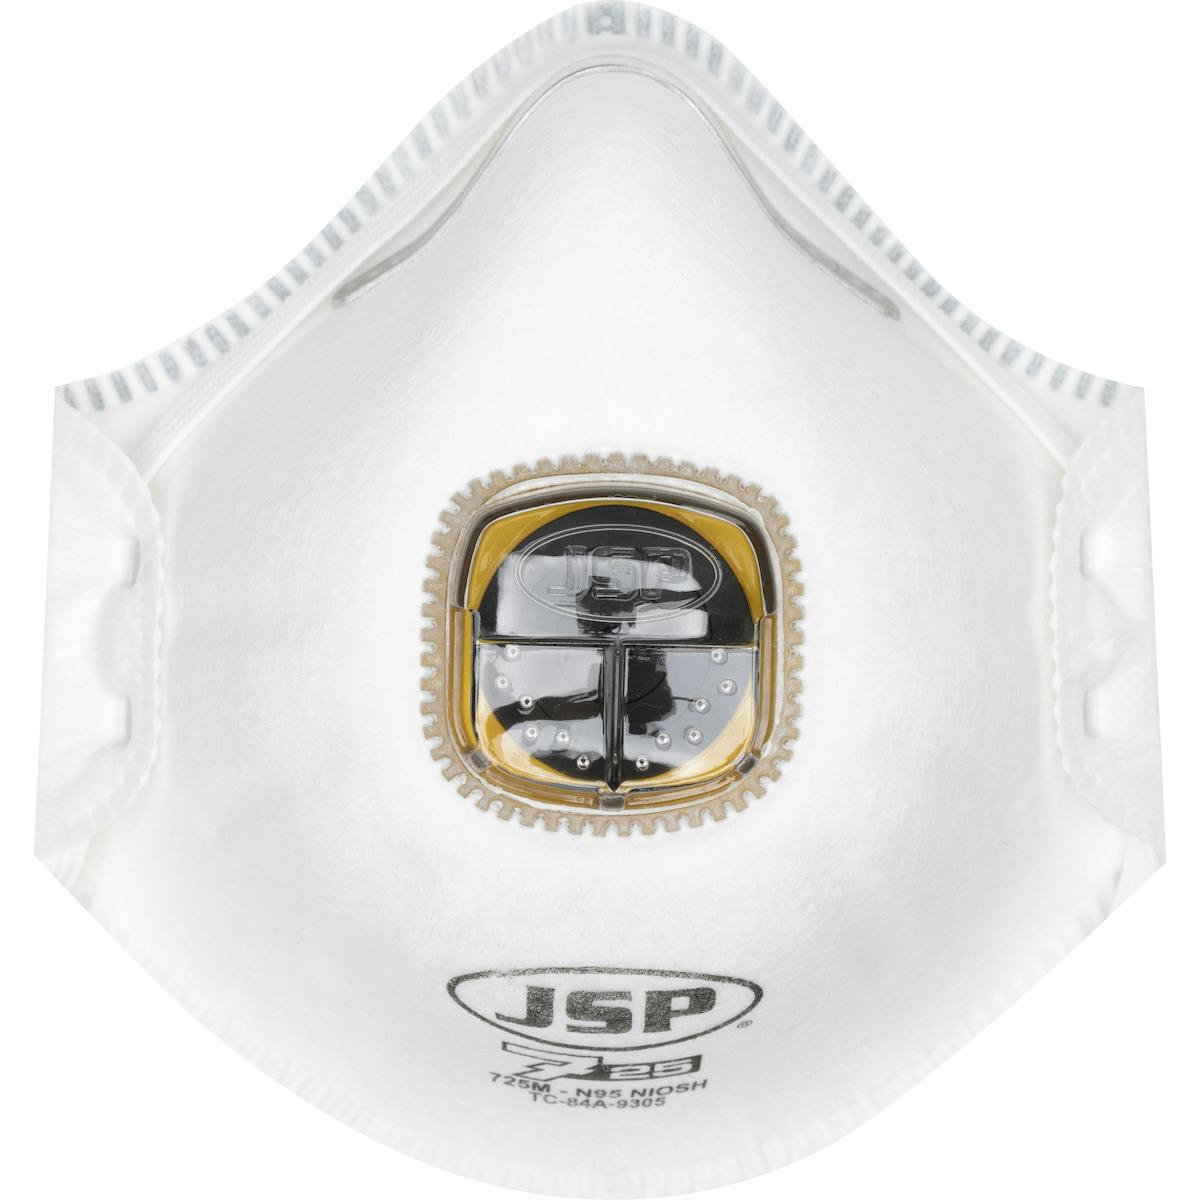 Premium N95 Disposable Respirator with Valve - 10 Pack, White (272-RPD725N95) - OS_1